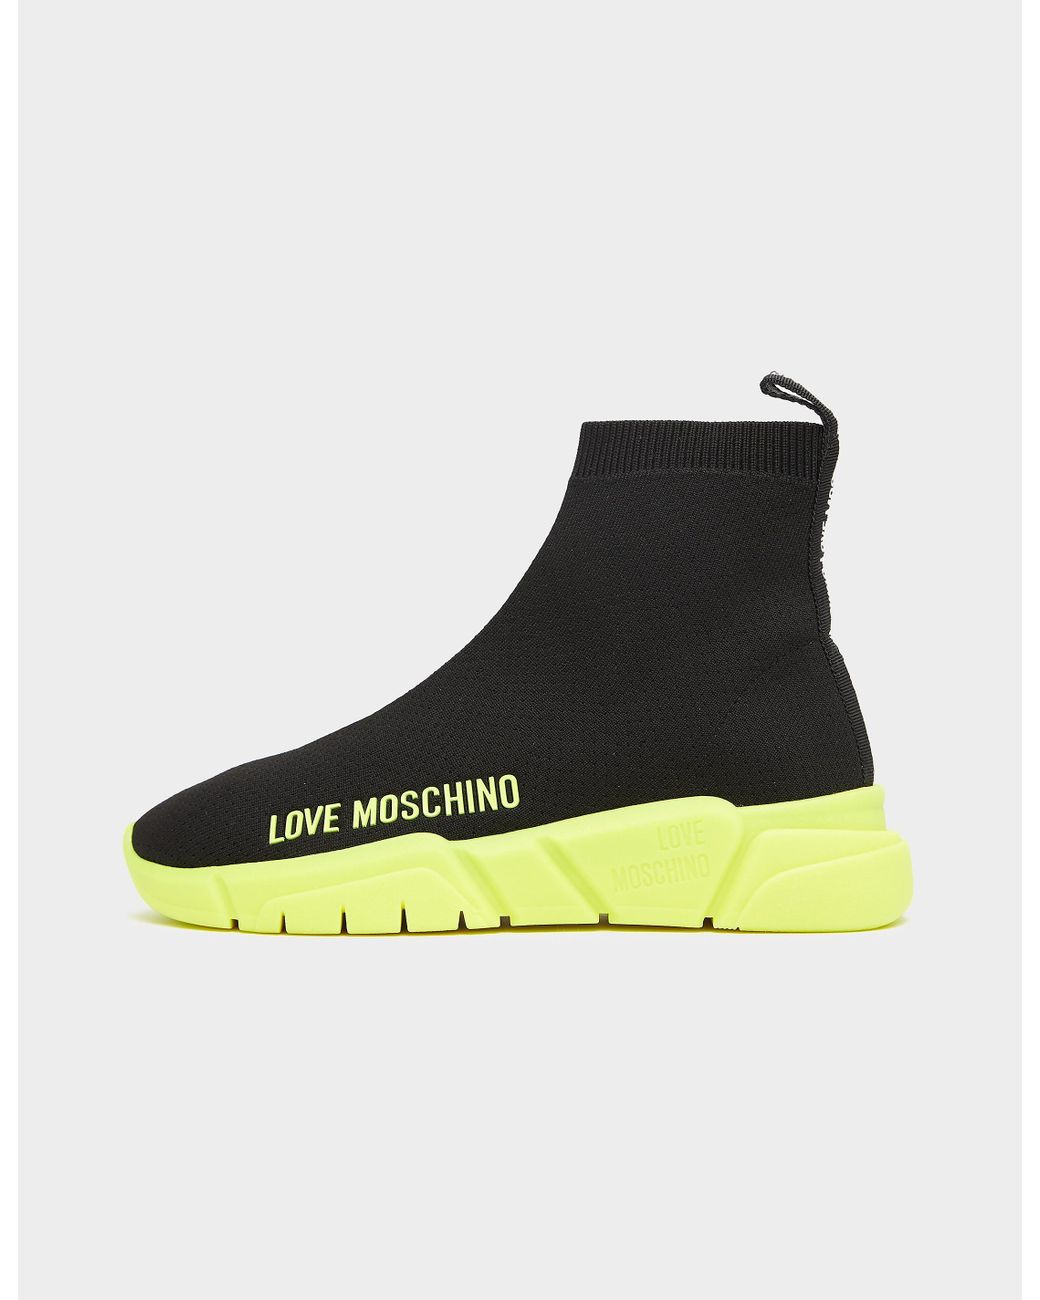 Love Moschino Logo Neon Sock Trainer Trainers in Black | Lyst